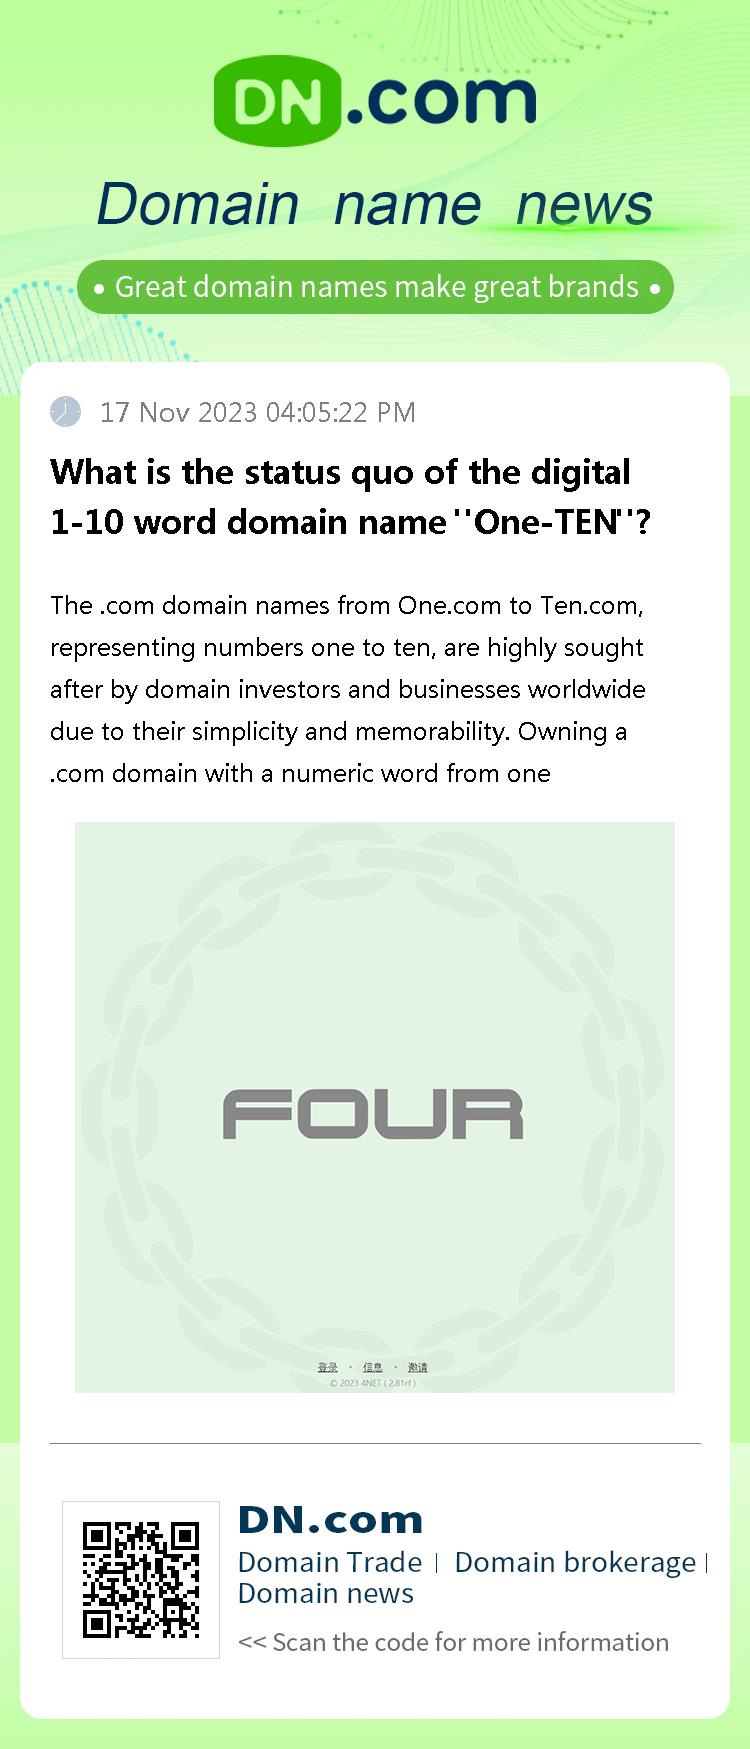 What is the status quo of the digital 1-10 word domain name 